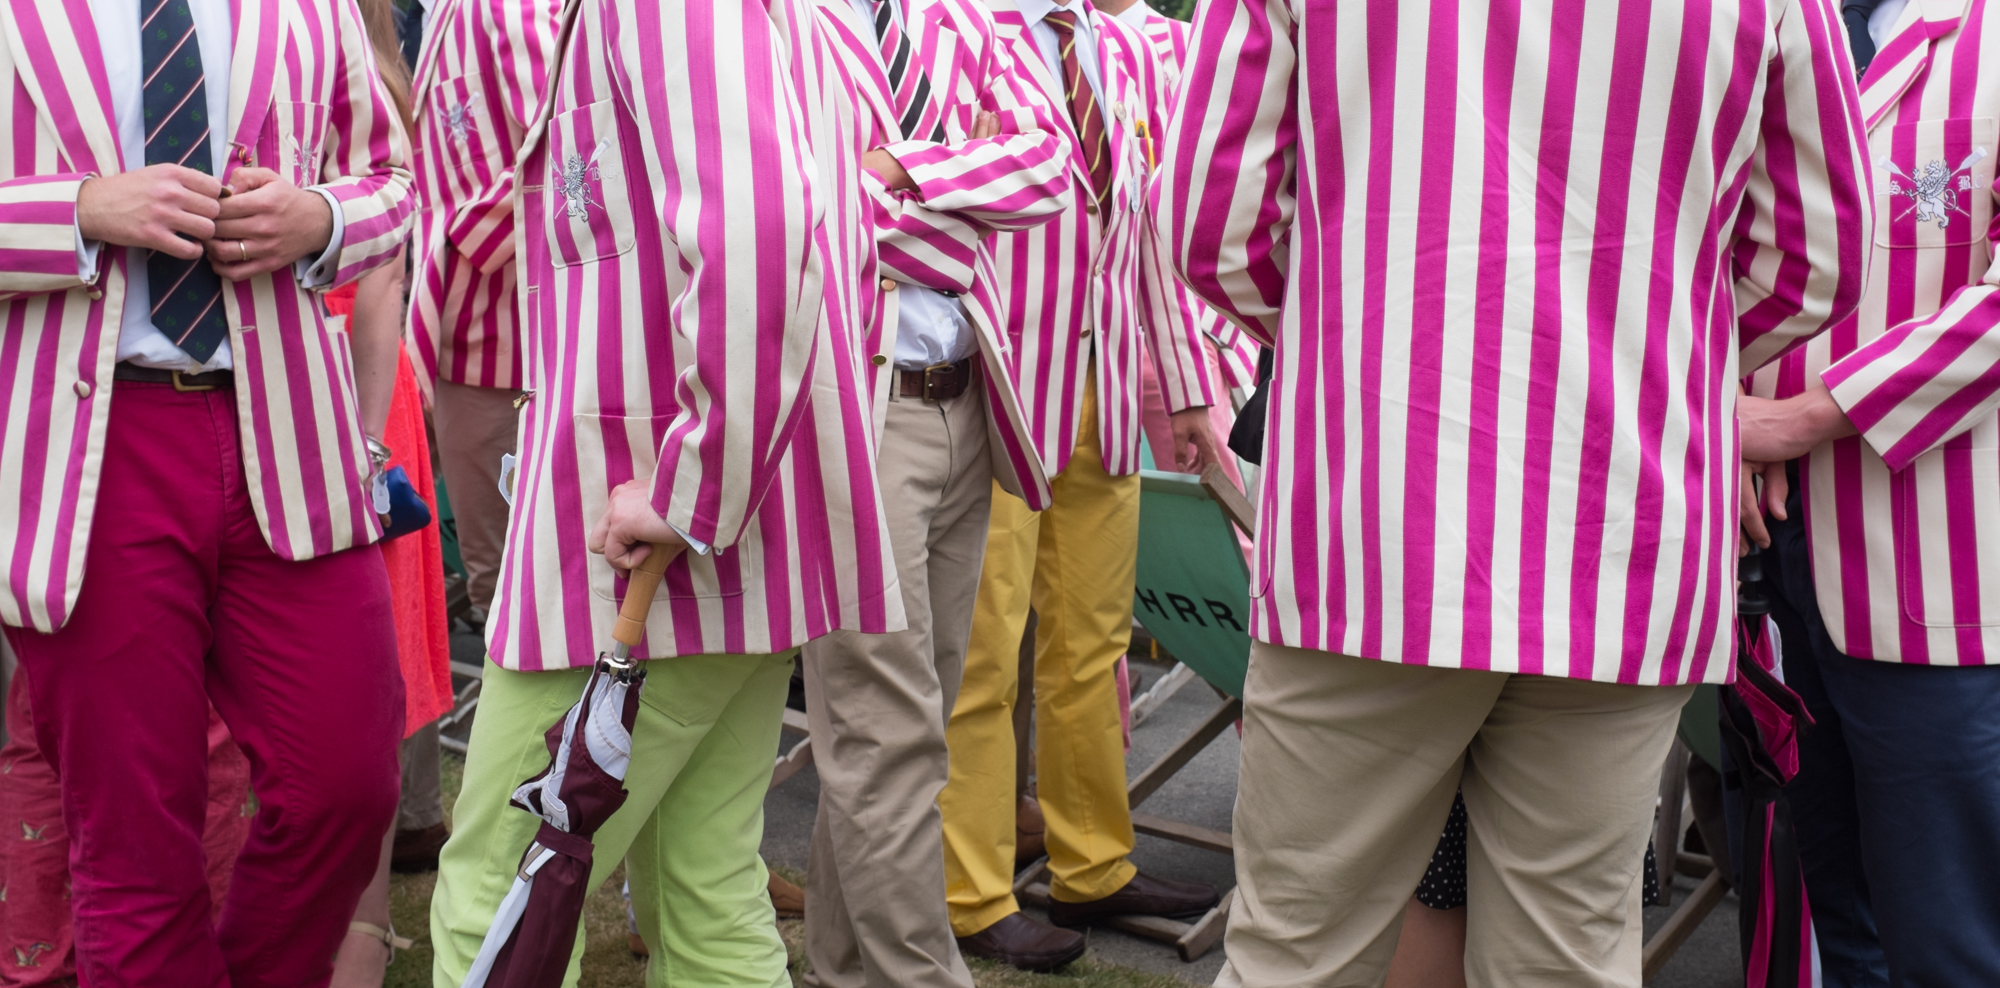  Rowers from Abingdon School, wearing their distinctive blazers, mingle with the crowds  at Henley Royal Regatta. 